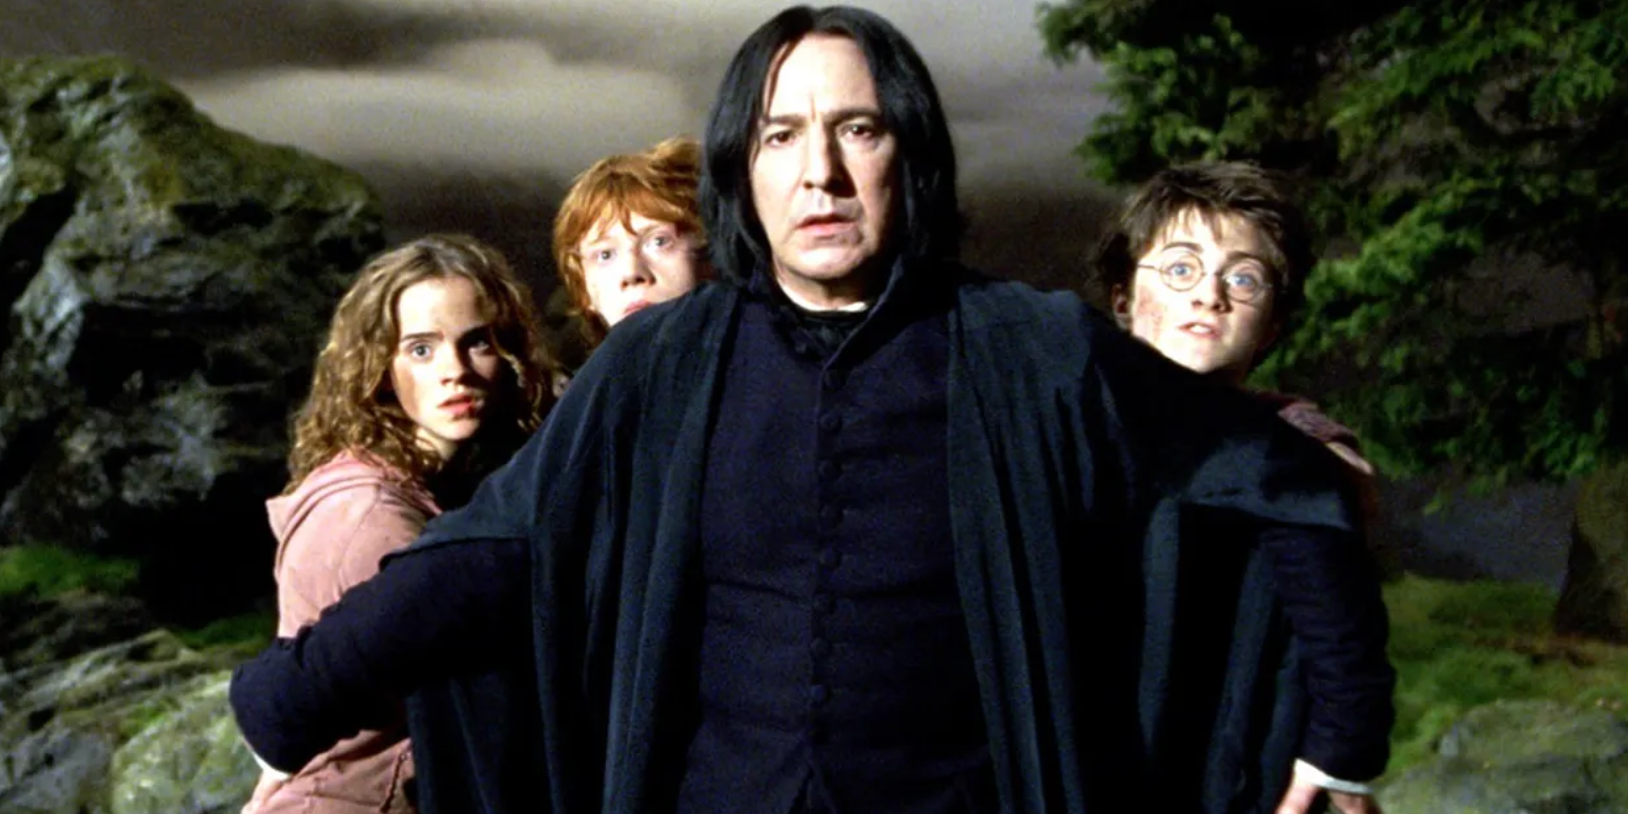 Snape standing in front of Harry, Ron and Hermione in Harry Potter